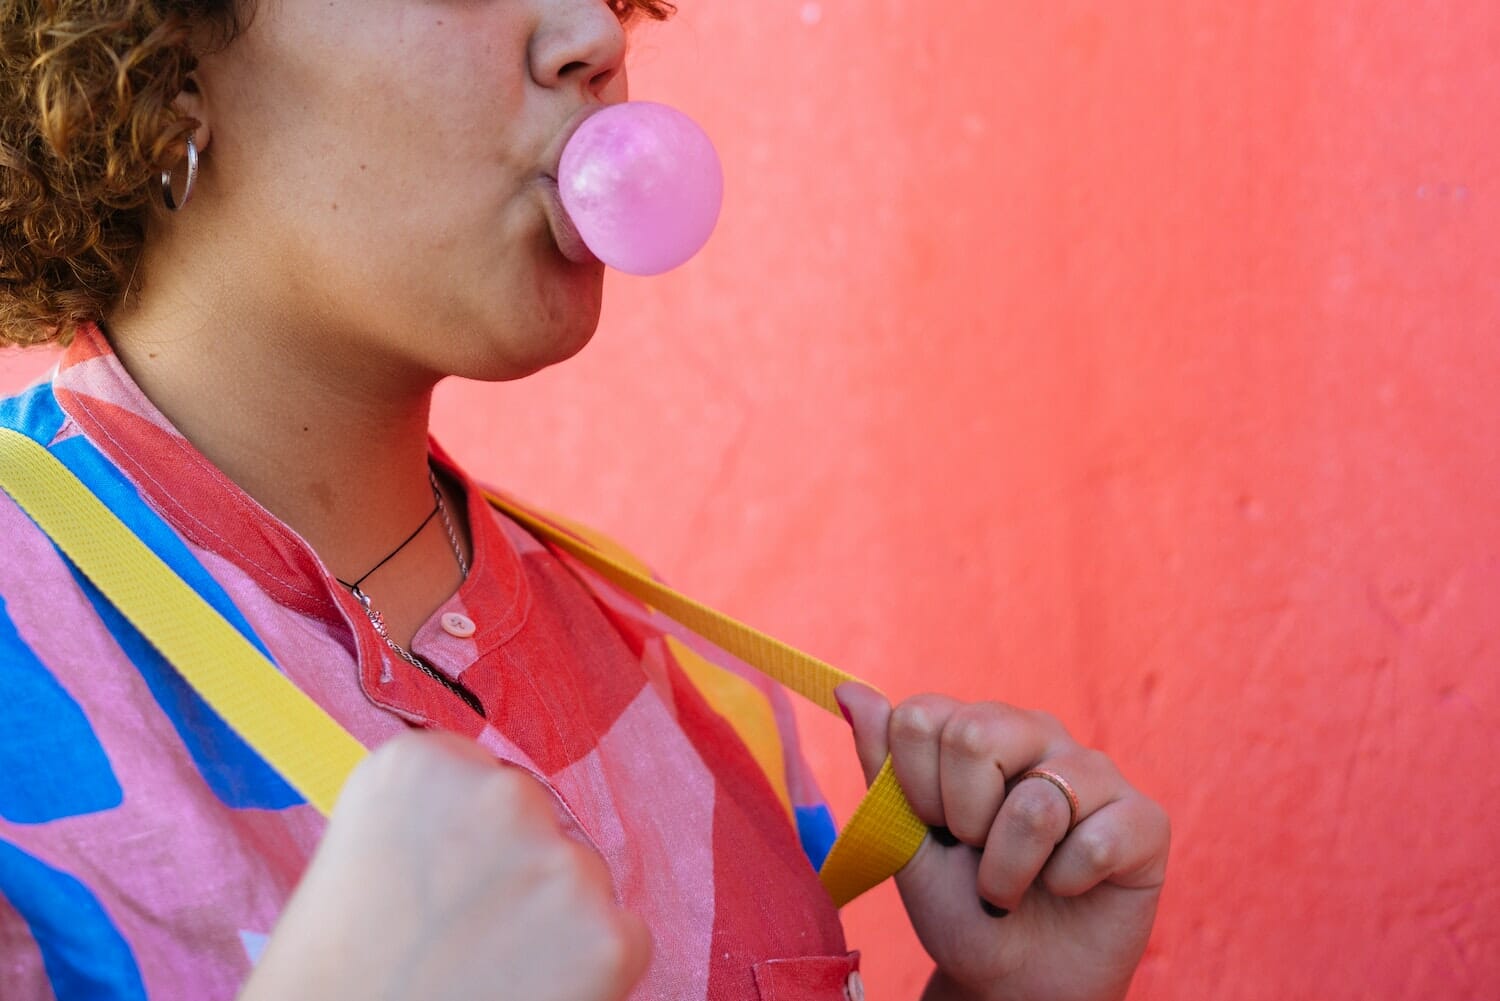 Girl and pink bubble gum - Lawyer's Design School